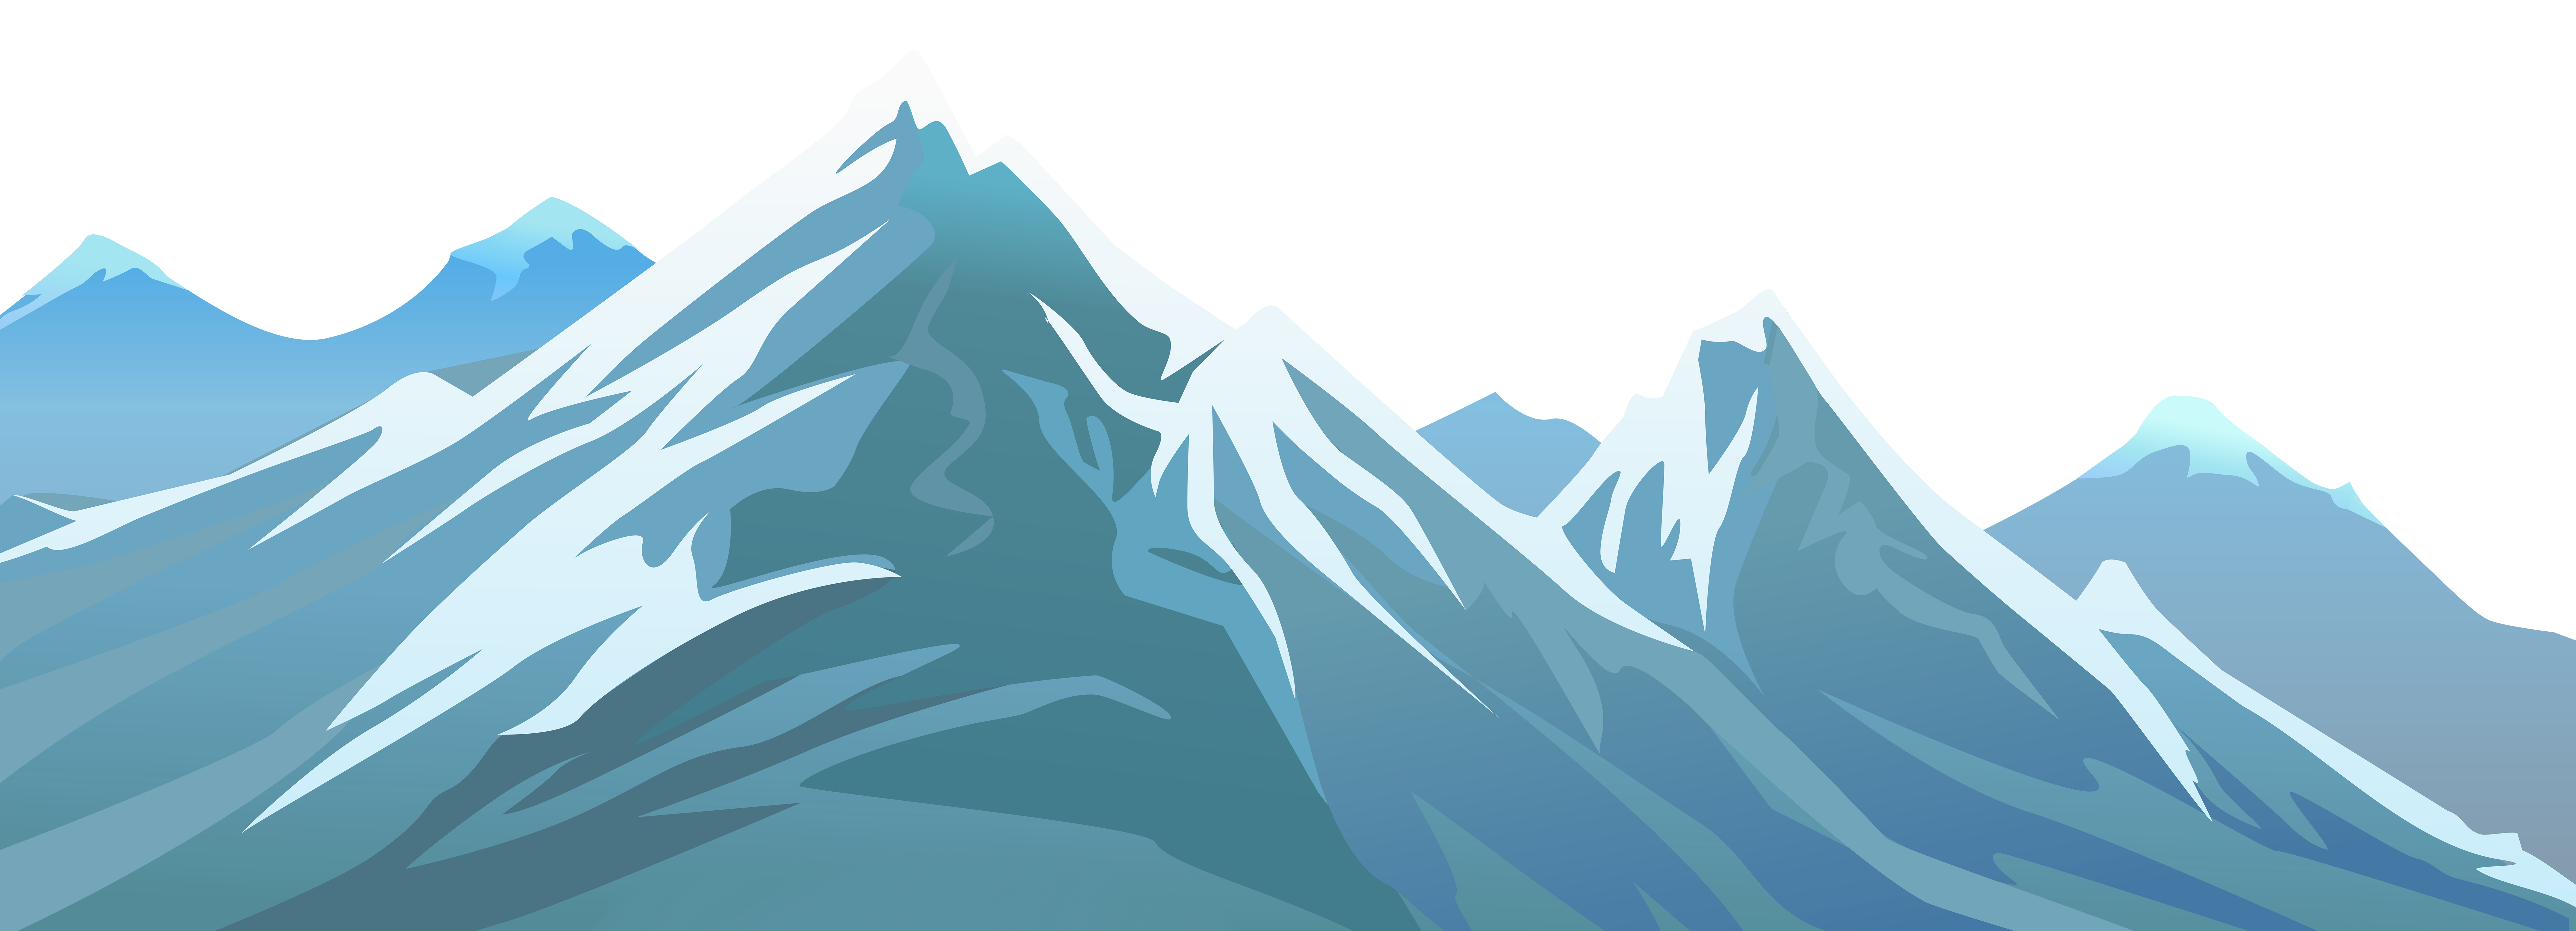 Snowy transparent png clip. Clipart mountain